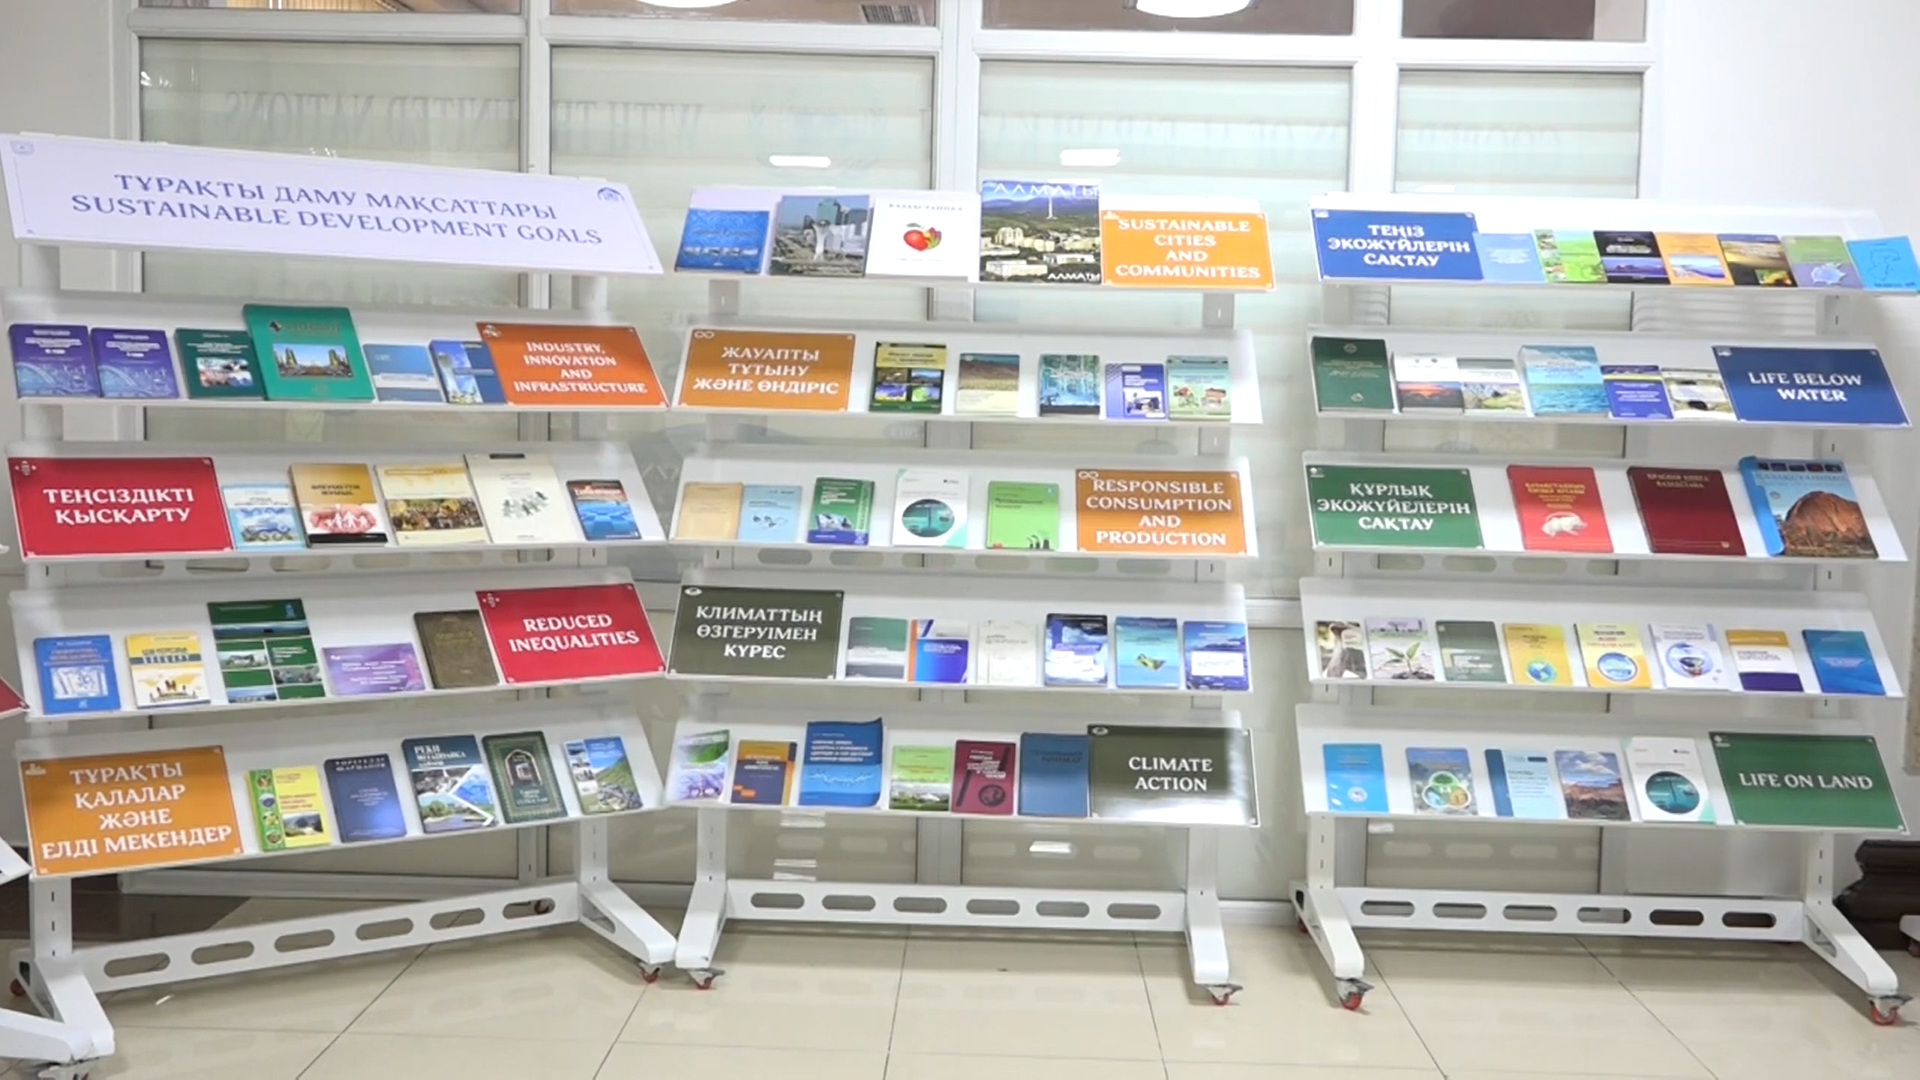 KazNU hosted a book exhibition dedicated to the goals of the SDGs